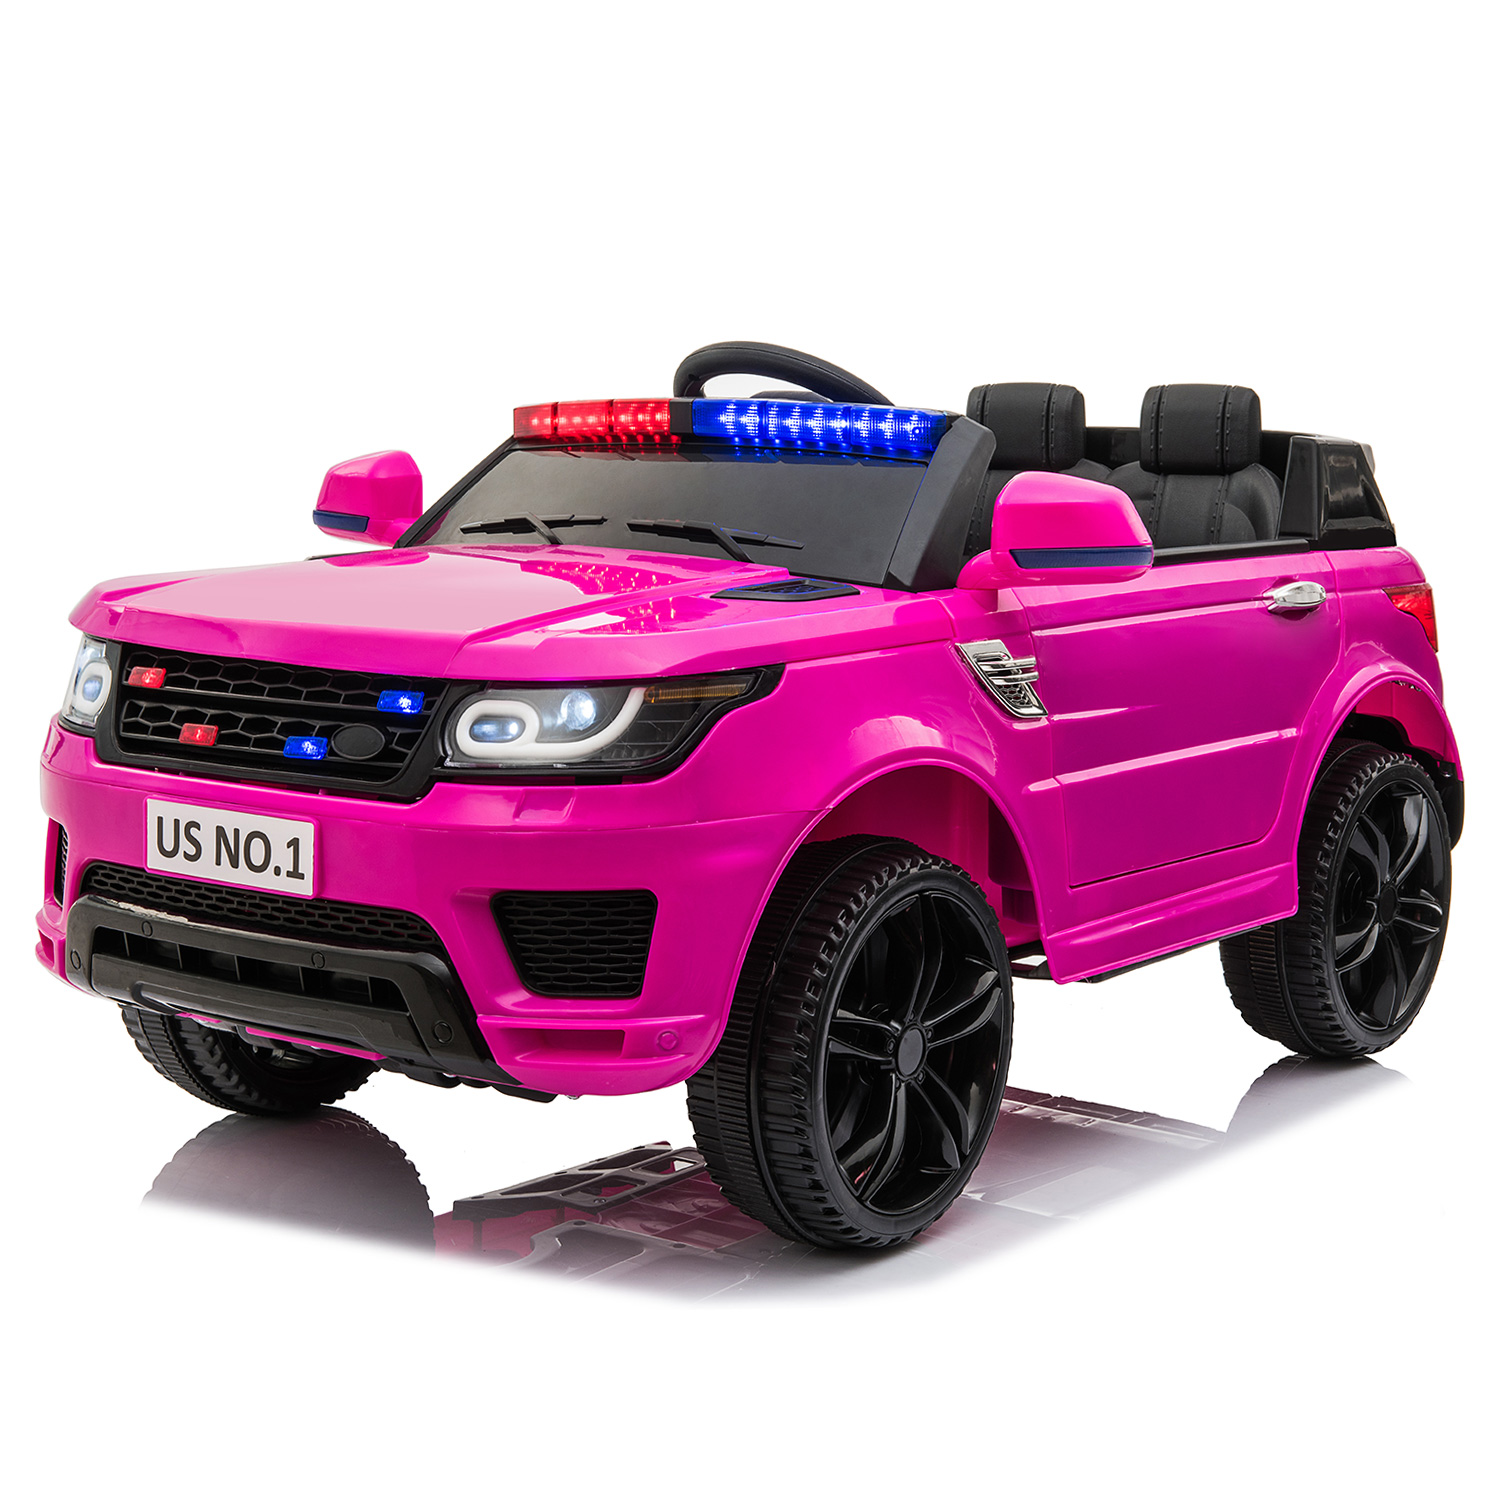 Tobbi Kid Ride on Police Car with Parental Remote Control, 12V Battery Powered Electric Truck Ride on Toy Vehicle ,Siren,Megaphone